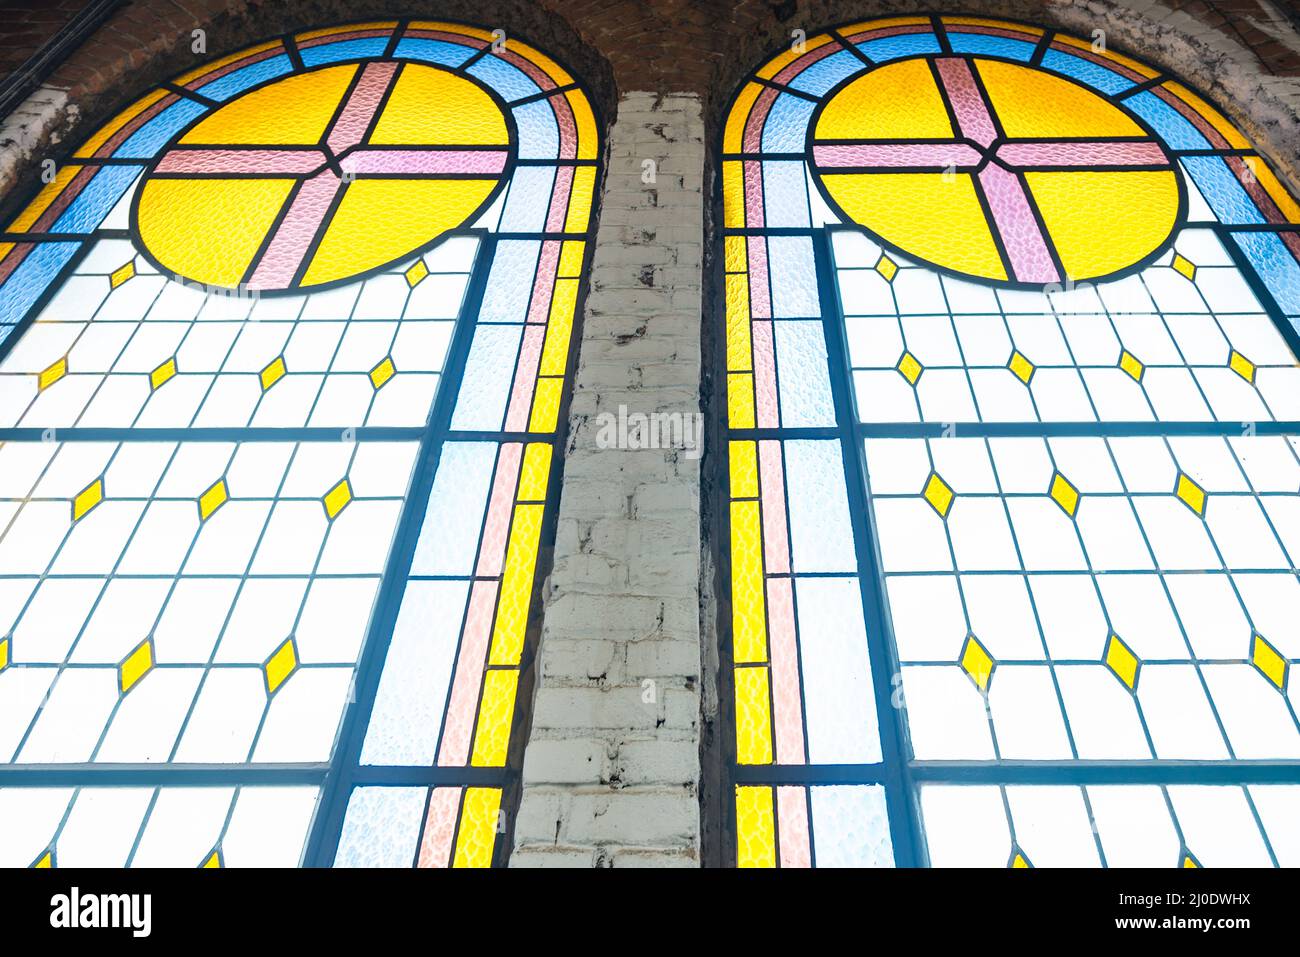 Stained glass windows at the catholic church Stock Photo